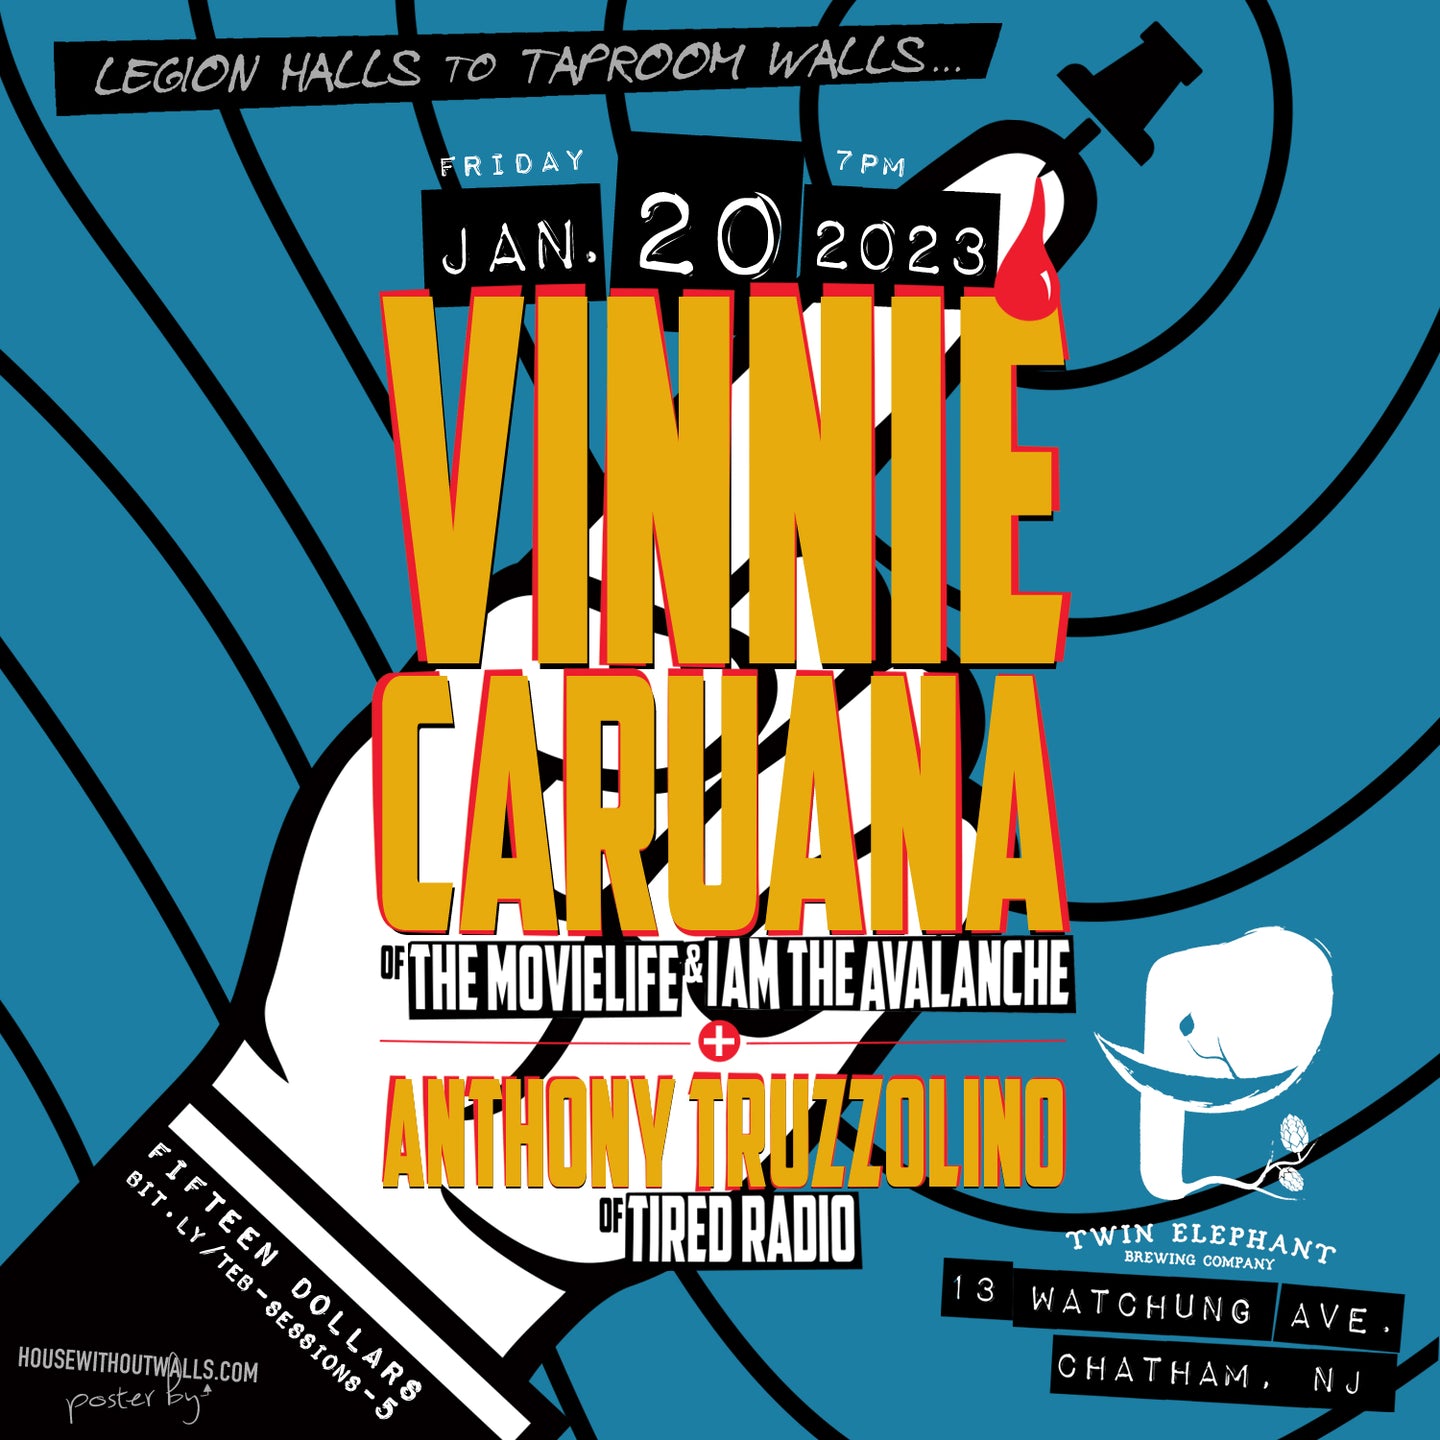 Vinnie Caruana (The Movielife) Tickets